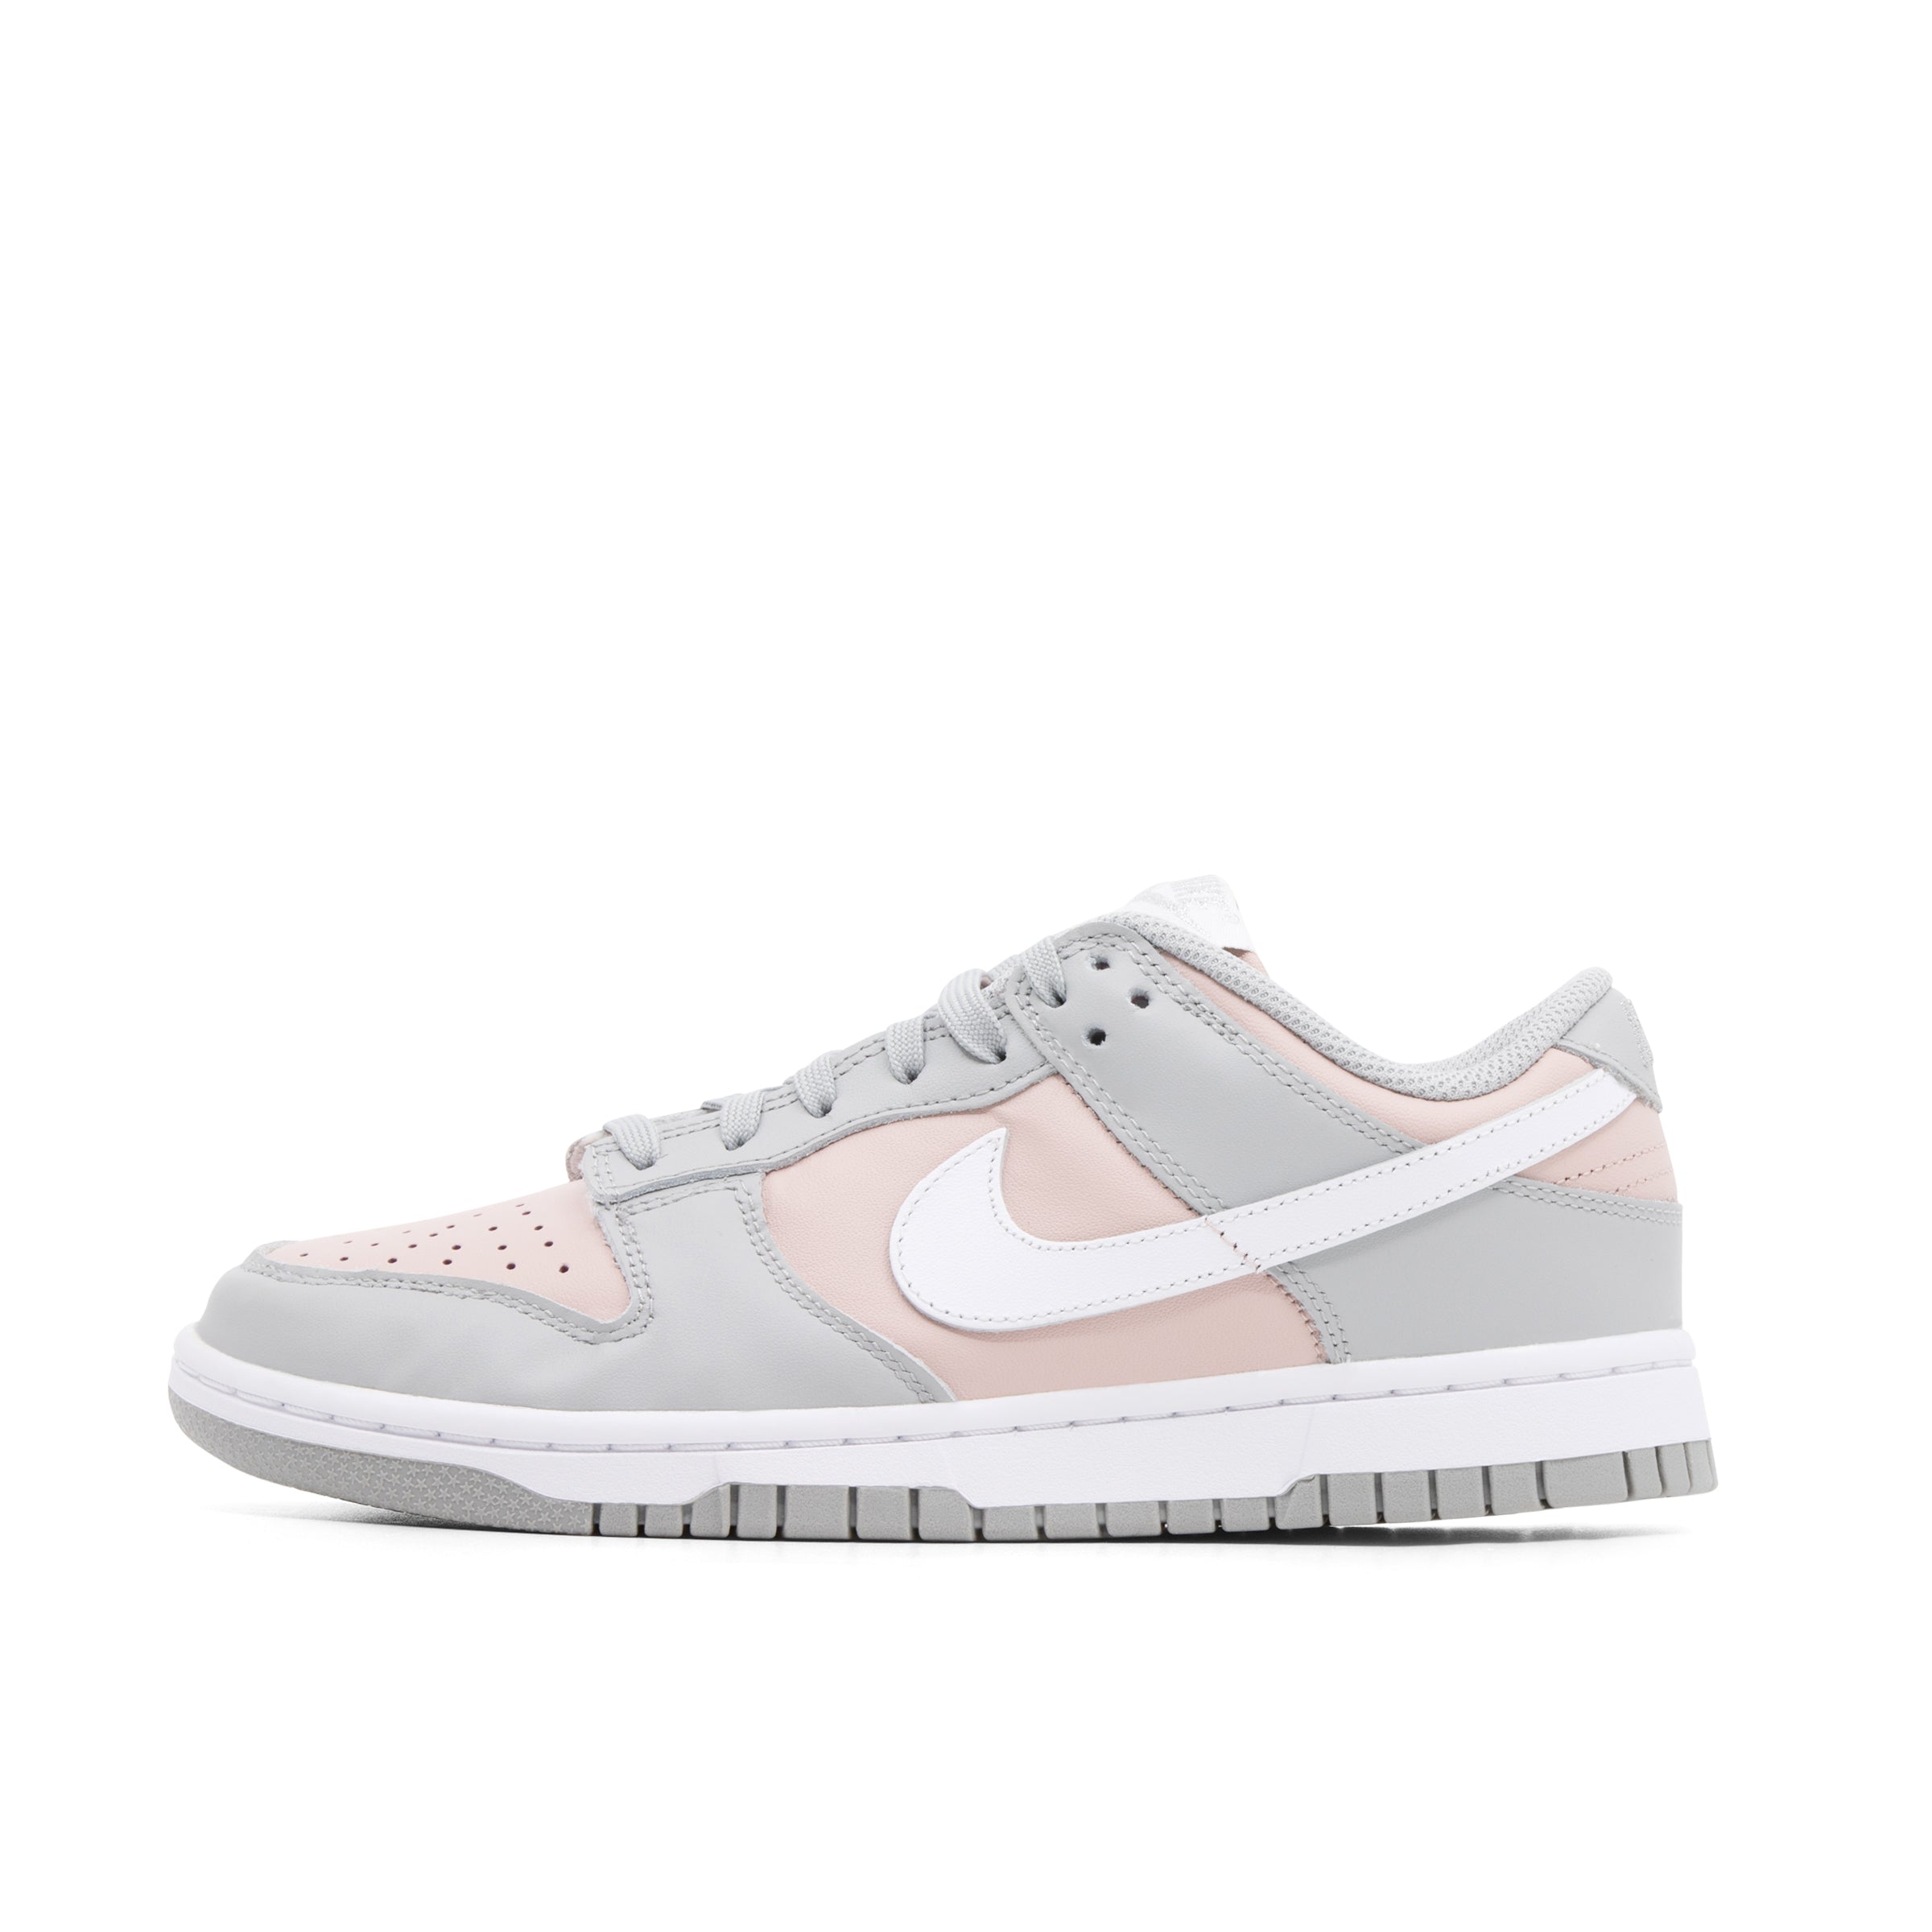 NIKE DUNK LOW WMNS SOFT GREY PINK